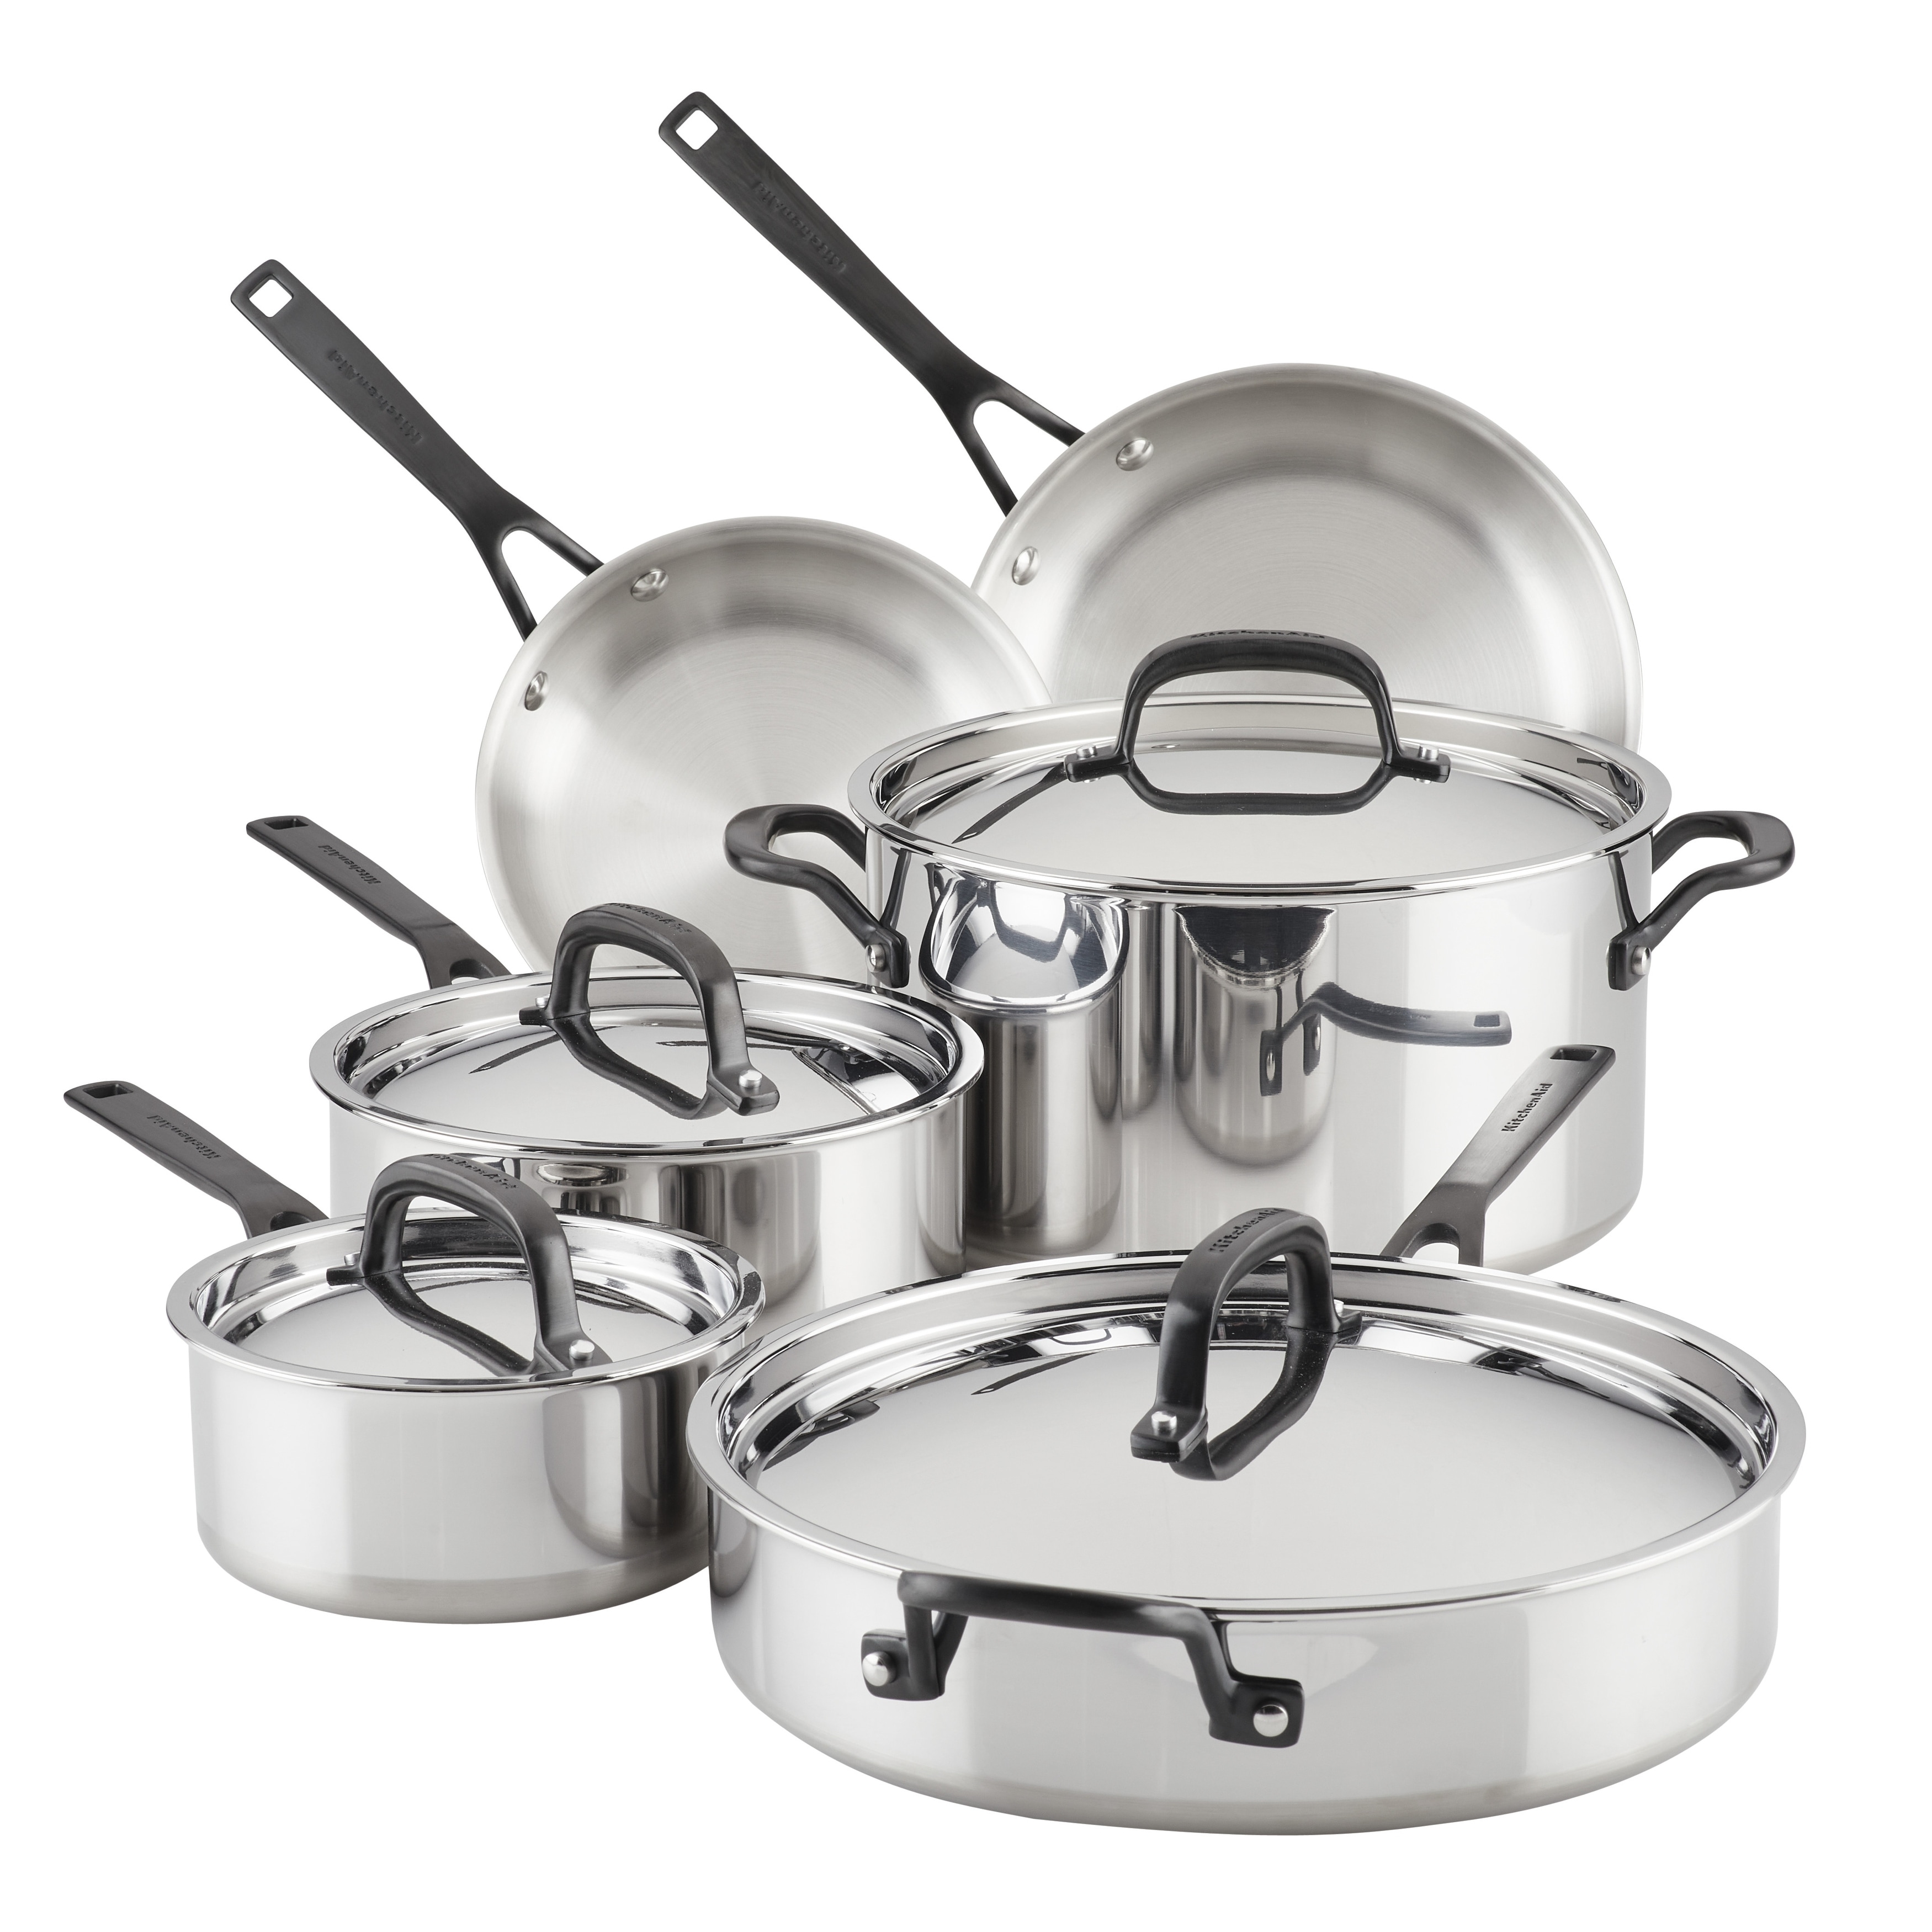 https://ak1.ostkcdn.com/images/products/is/images/direct/e67f1bc3744306cbb91b15479acd501bdc0b9d32/KitchenAid-5-Ply-Clad-Stainless-Steel-Cookware-Set%2C-10-Piece.jpg